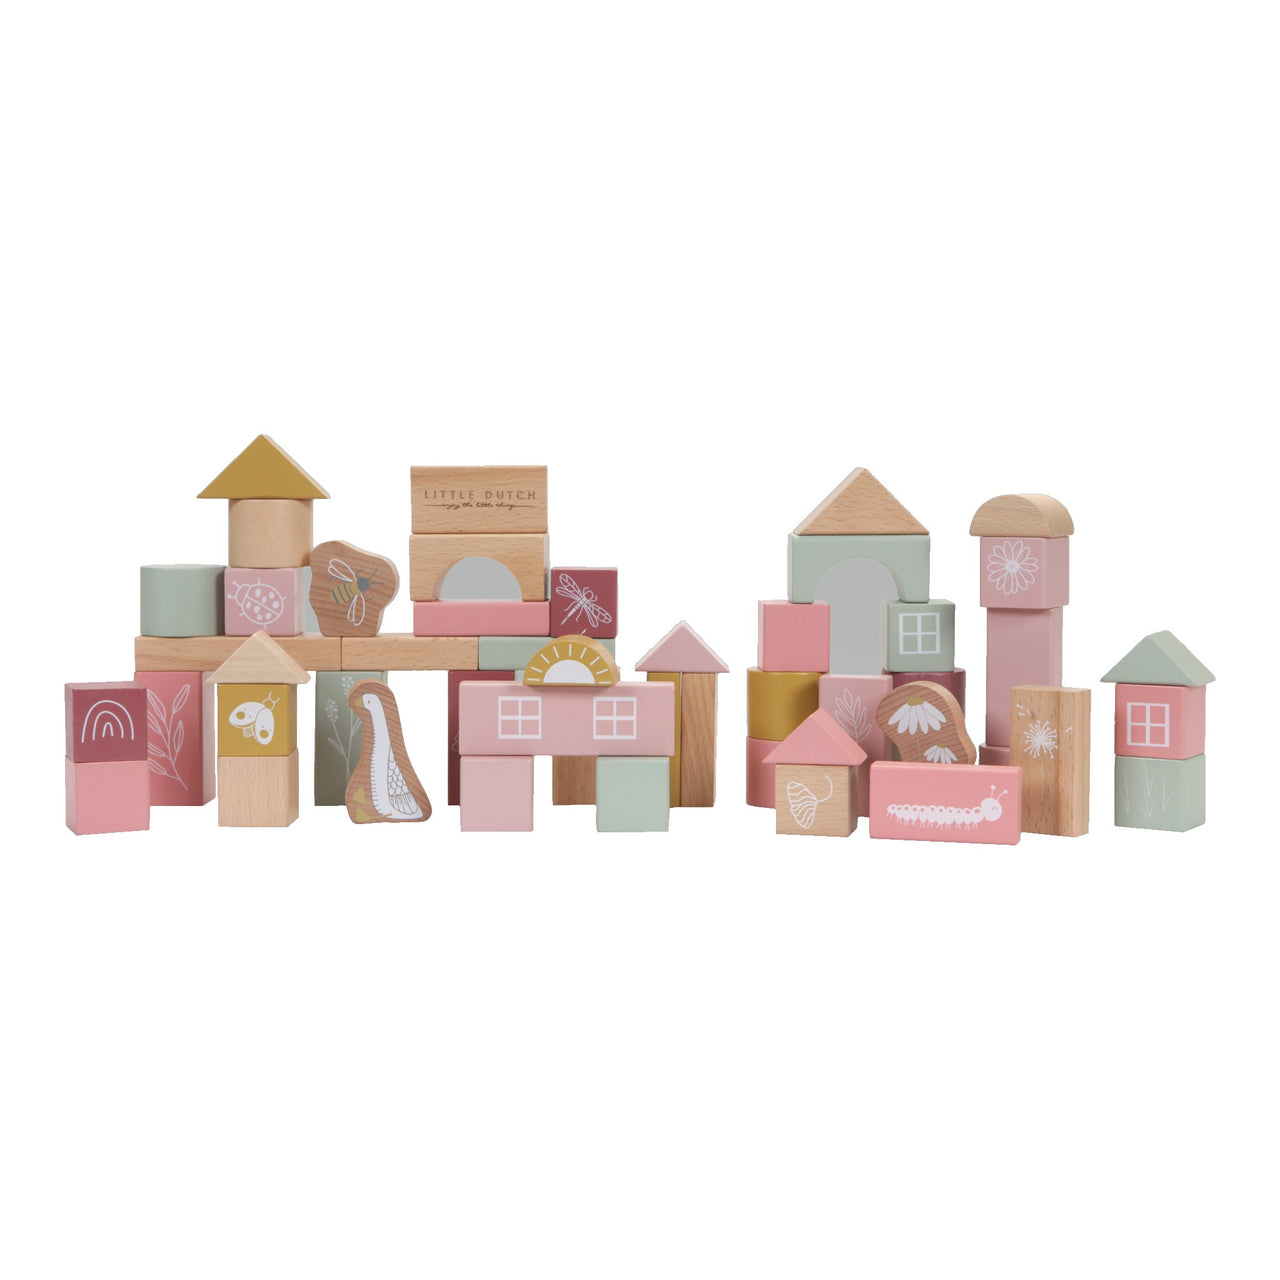 These pink wooden building blocks from little dutch are an all-time family favourite. The bucket contains no less than 50 wooden blocks in in various shapes and sizes, decorated with Little Goose and his friends from the countryside. Stack the blocks to build fun shapes or towers. The blocks guarantee a lot of building fun and can be stored effortlessly in the bucket! 